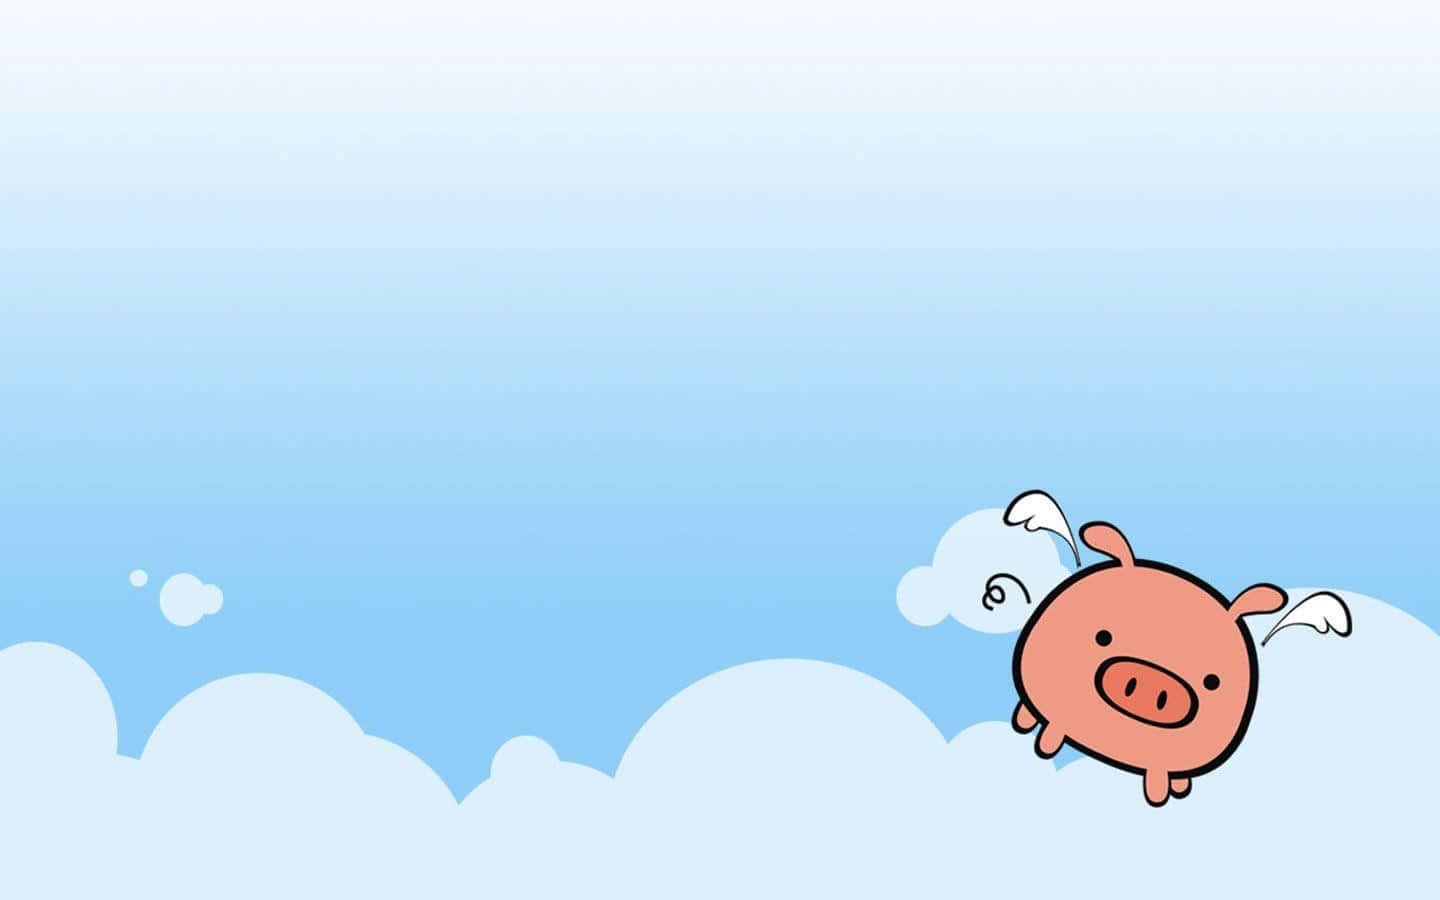 Fun and Savings go Hand-in-Hand with Piggy